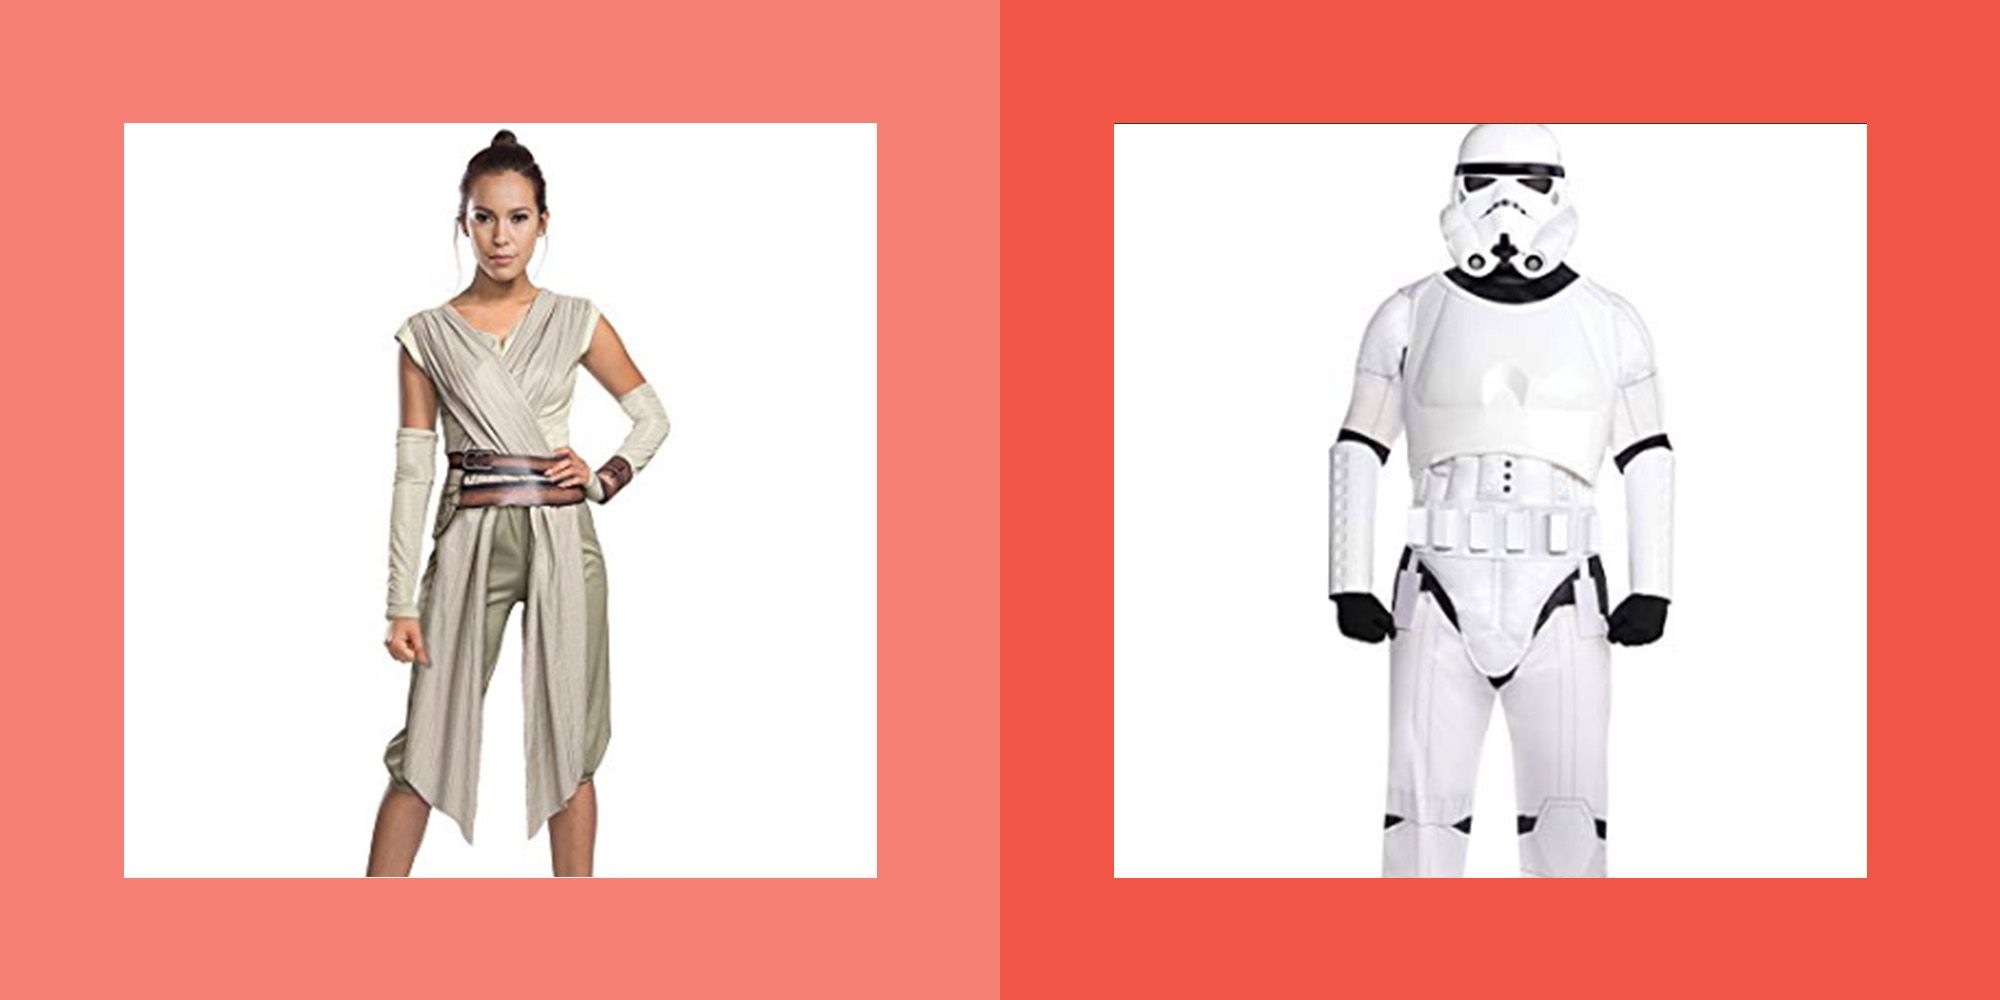 Can I dress up as a Star Wars character?